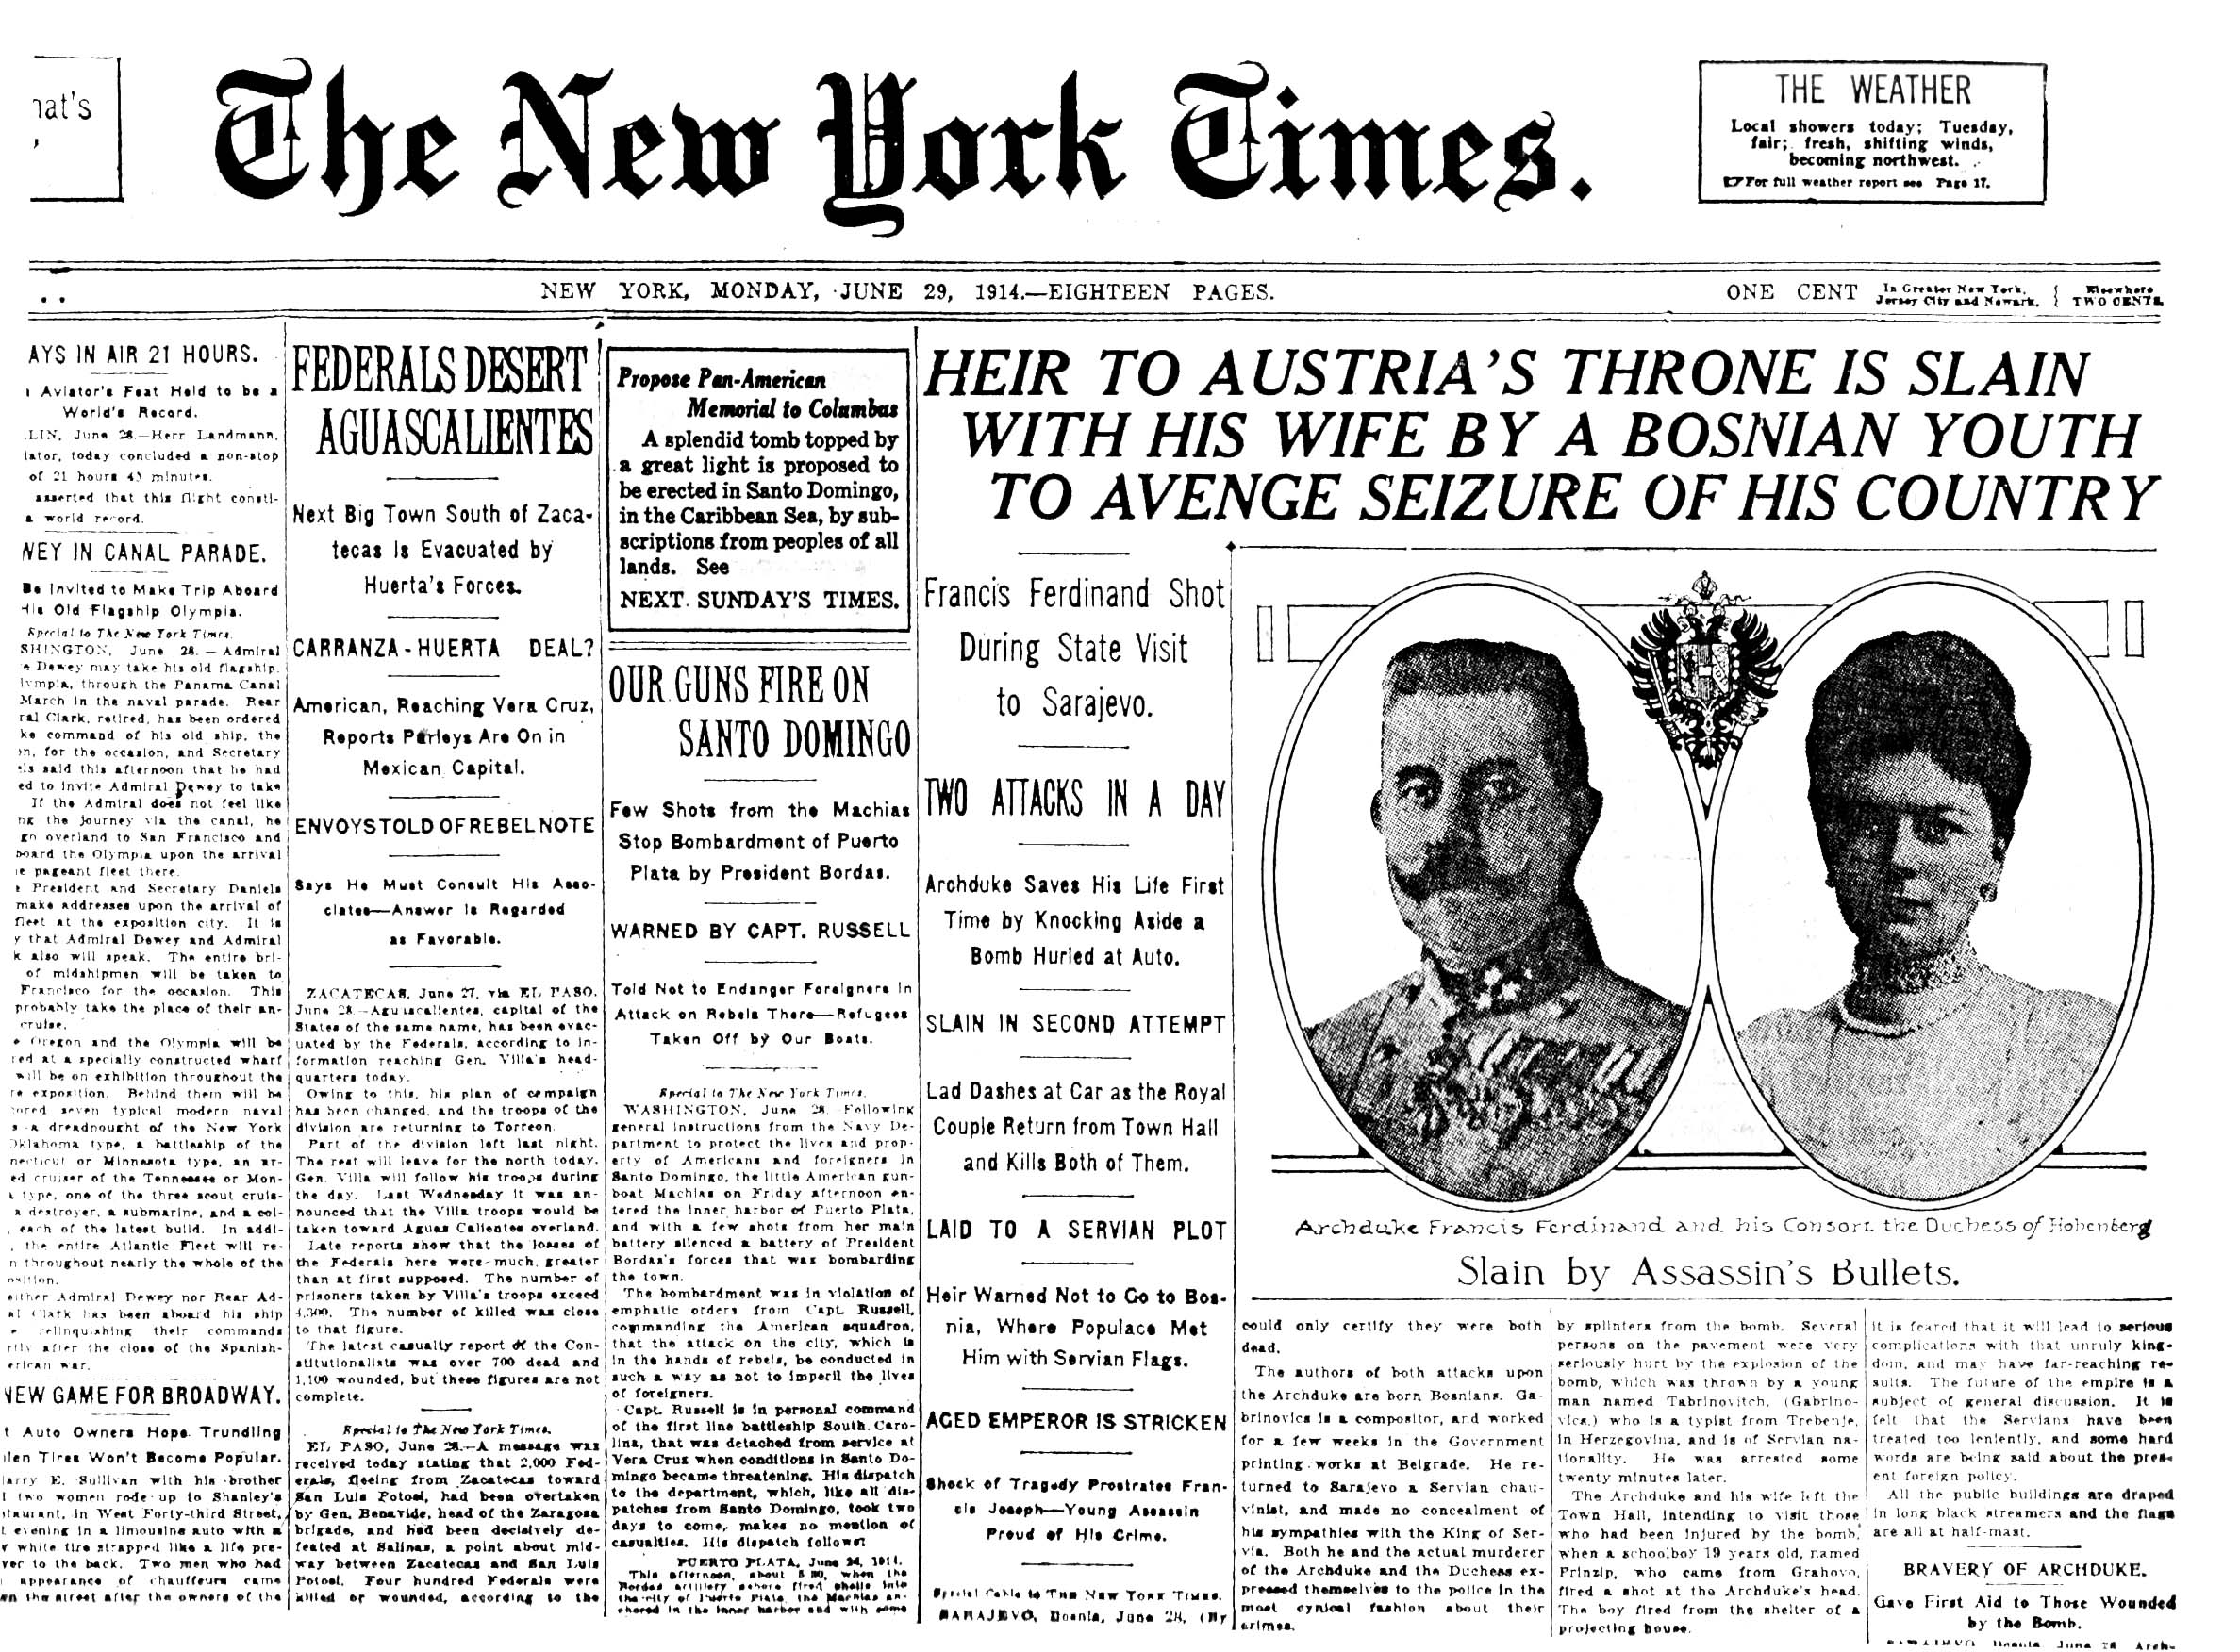 An issue of The New York Times dated June 29